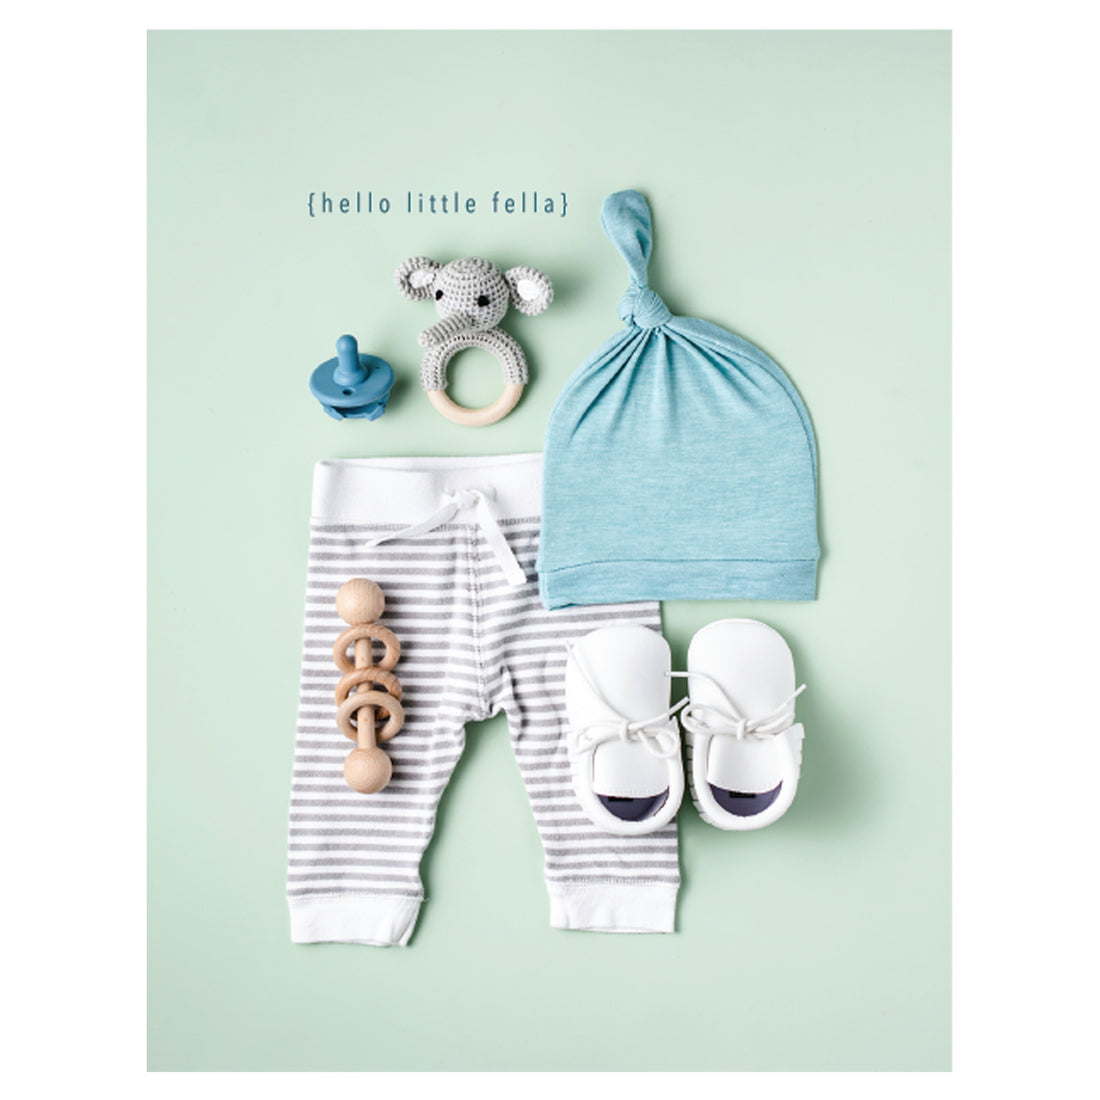 A photo of white and blue baby items including a cap, pants, shoes, a rattle and a pacifier on a light green background, with &quot;{hello little fella}&quot; printed in blue above the toys.